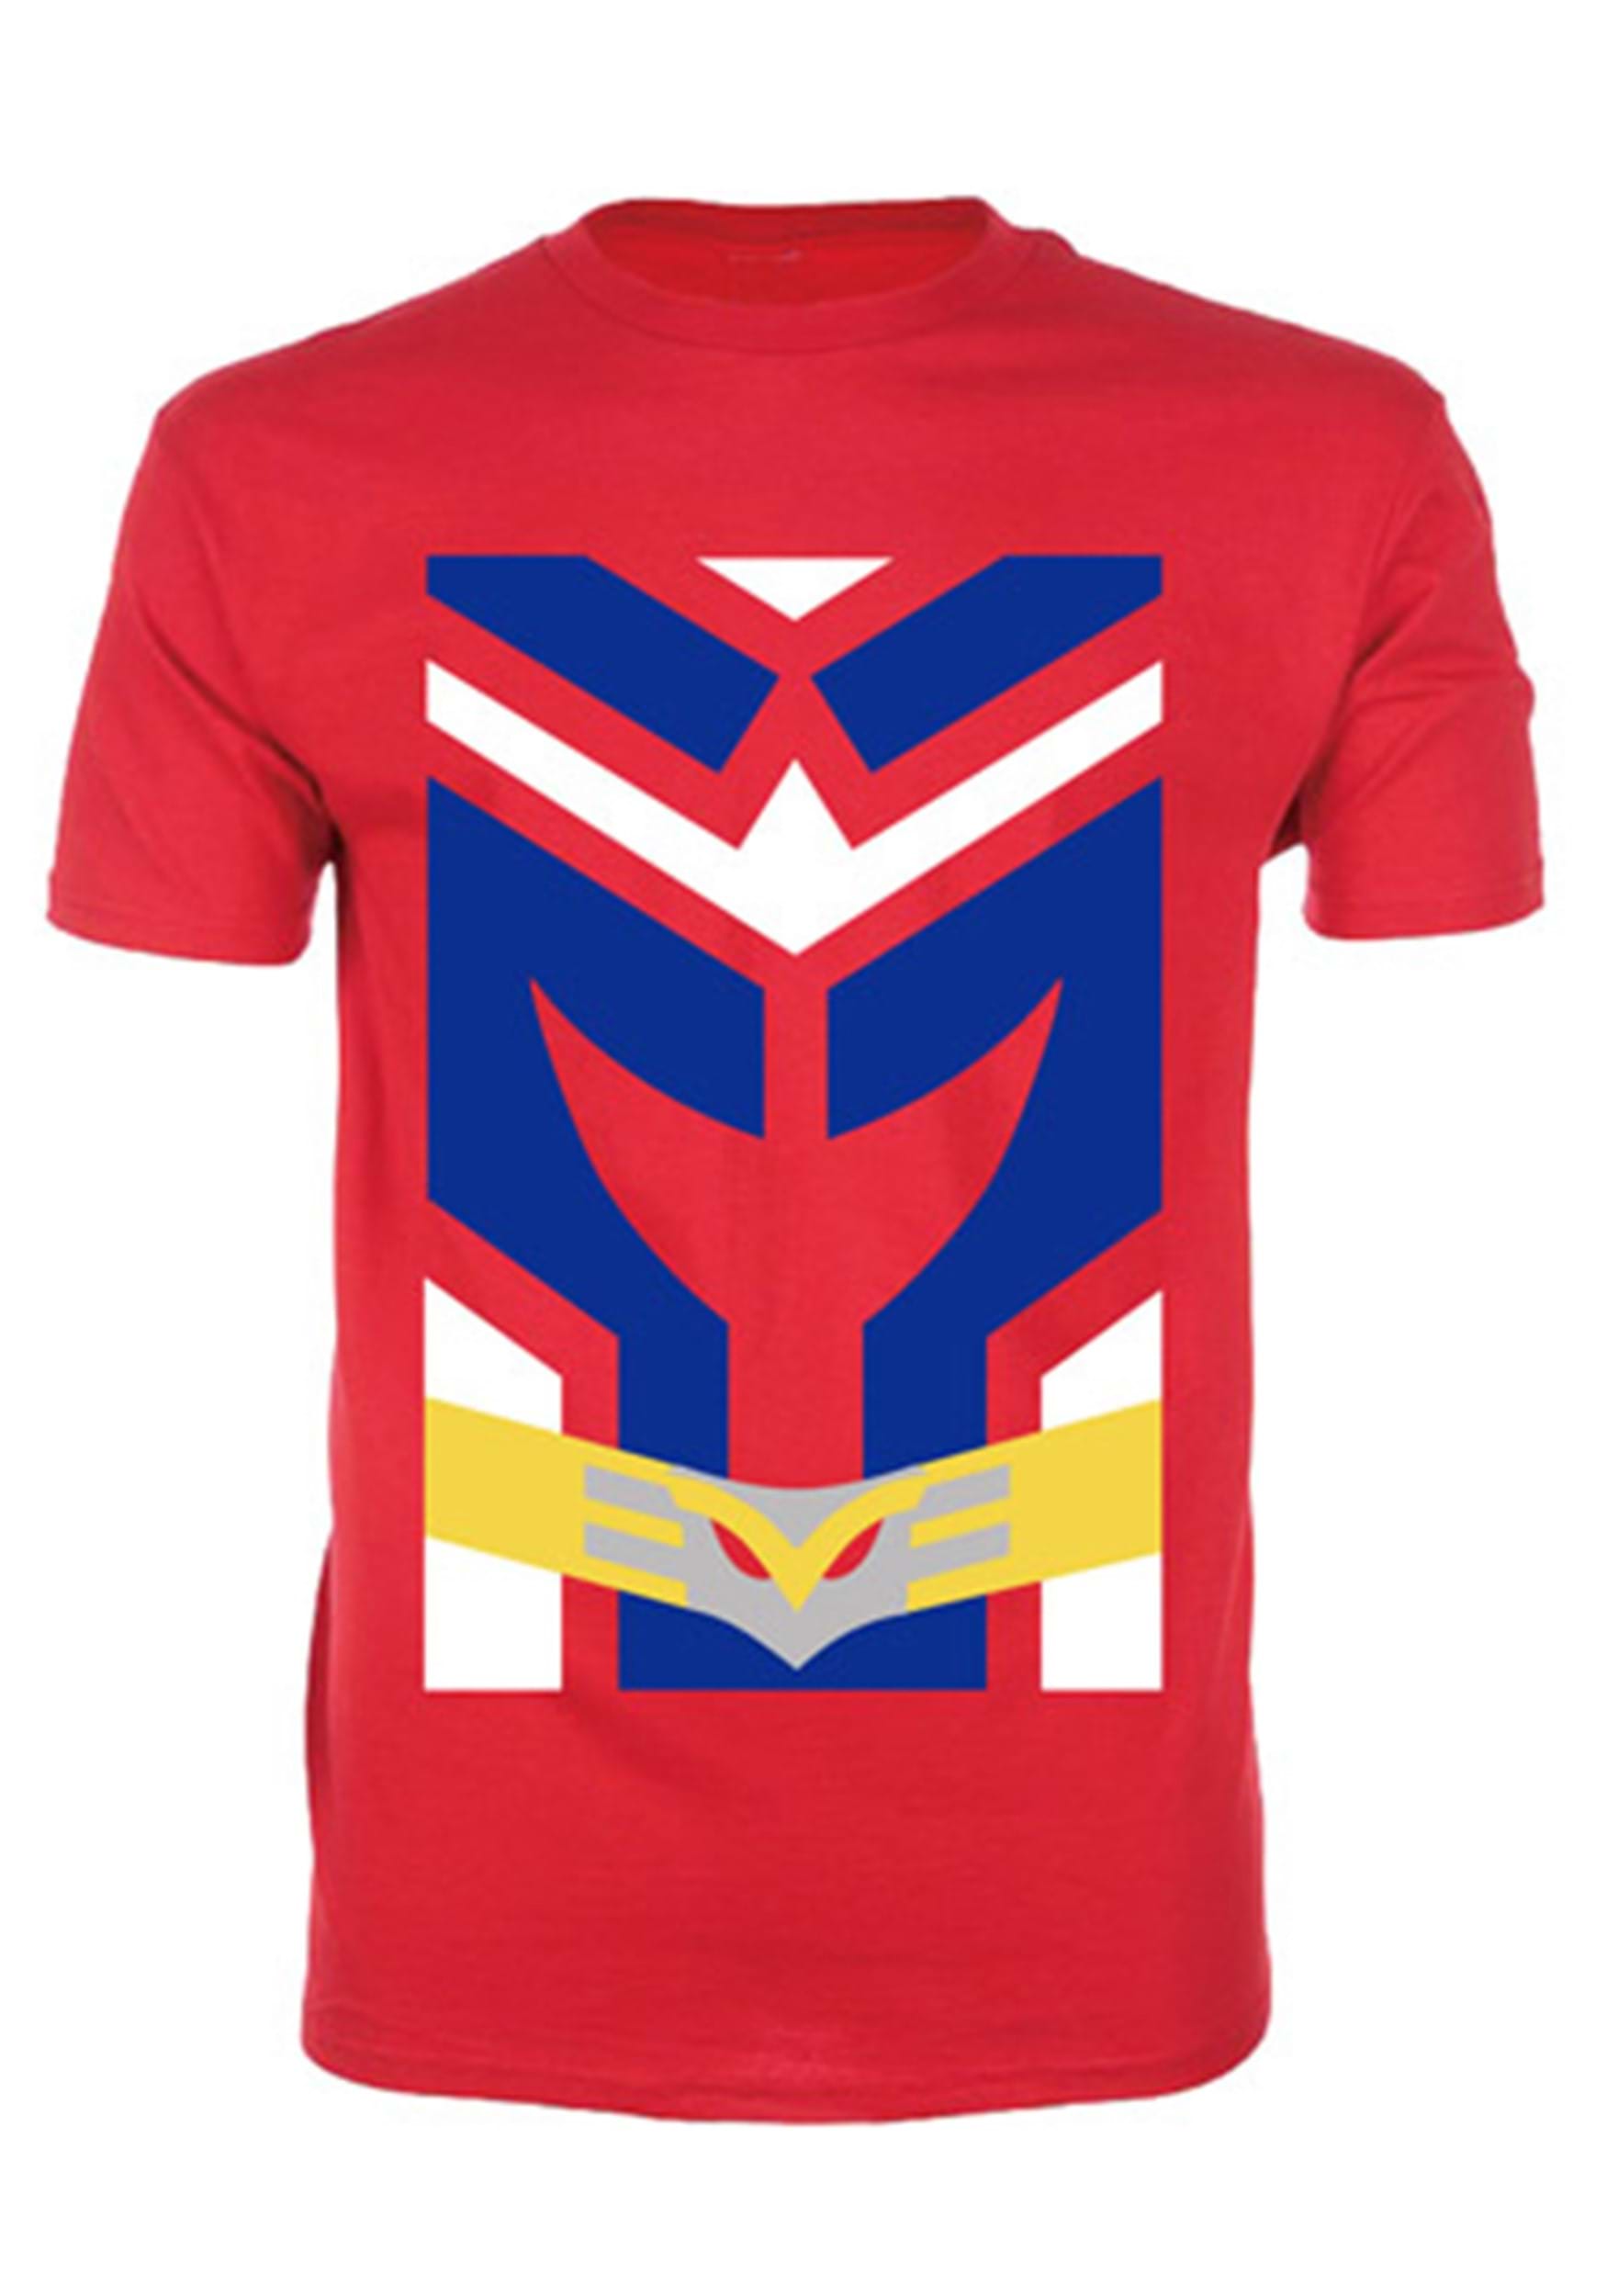 My Hero Academia: All Might Costume T-Shirt for Men